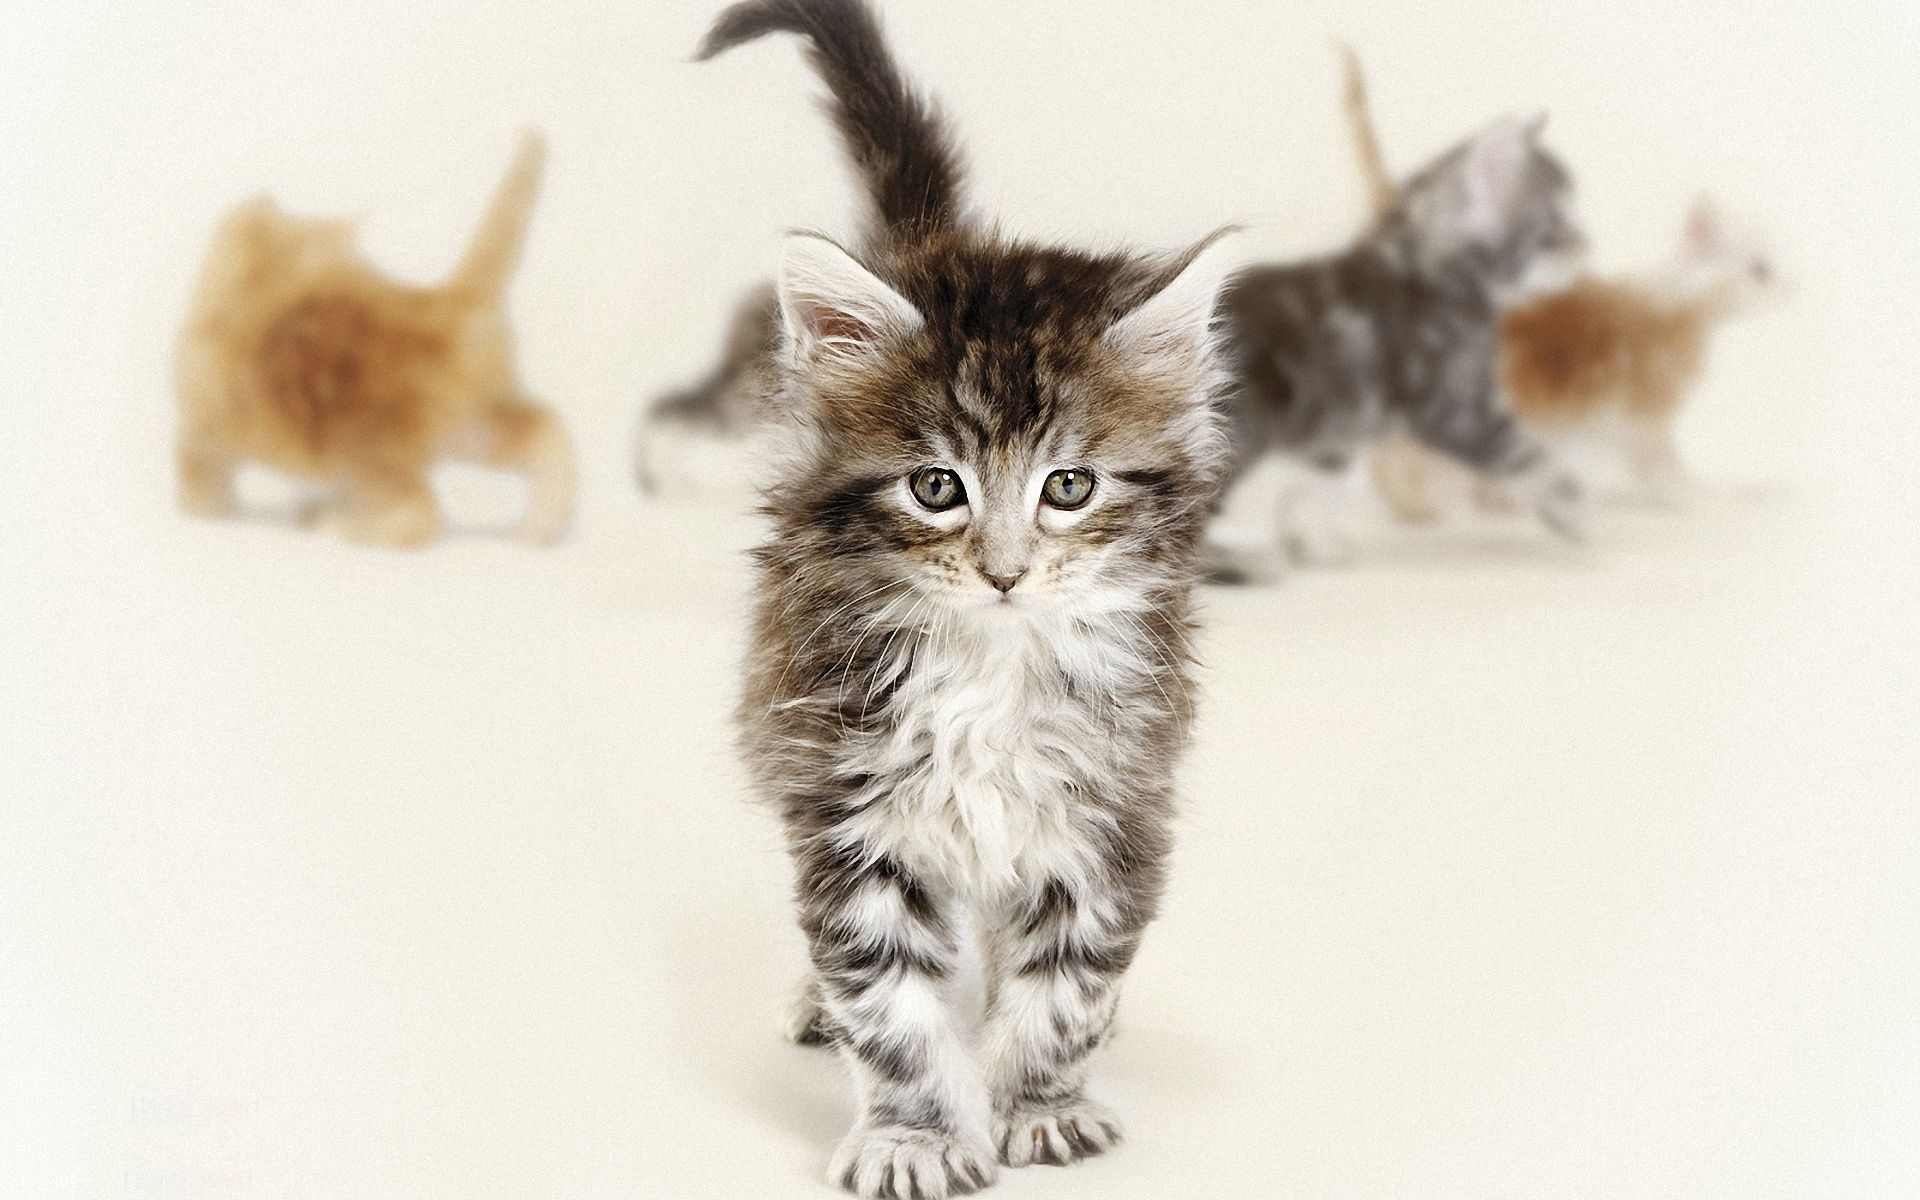 137549 3840x2160 PC pictures for free, download kitty, animals, blur, photosession 3840x2160 wallpapers on your desktop